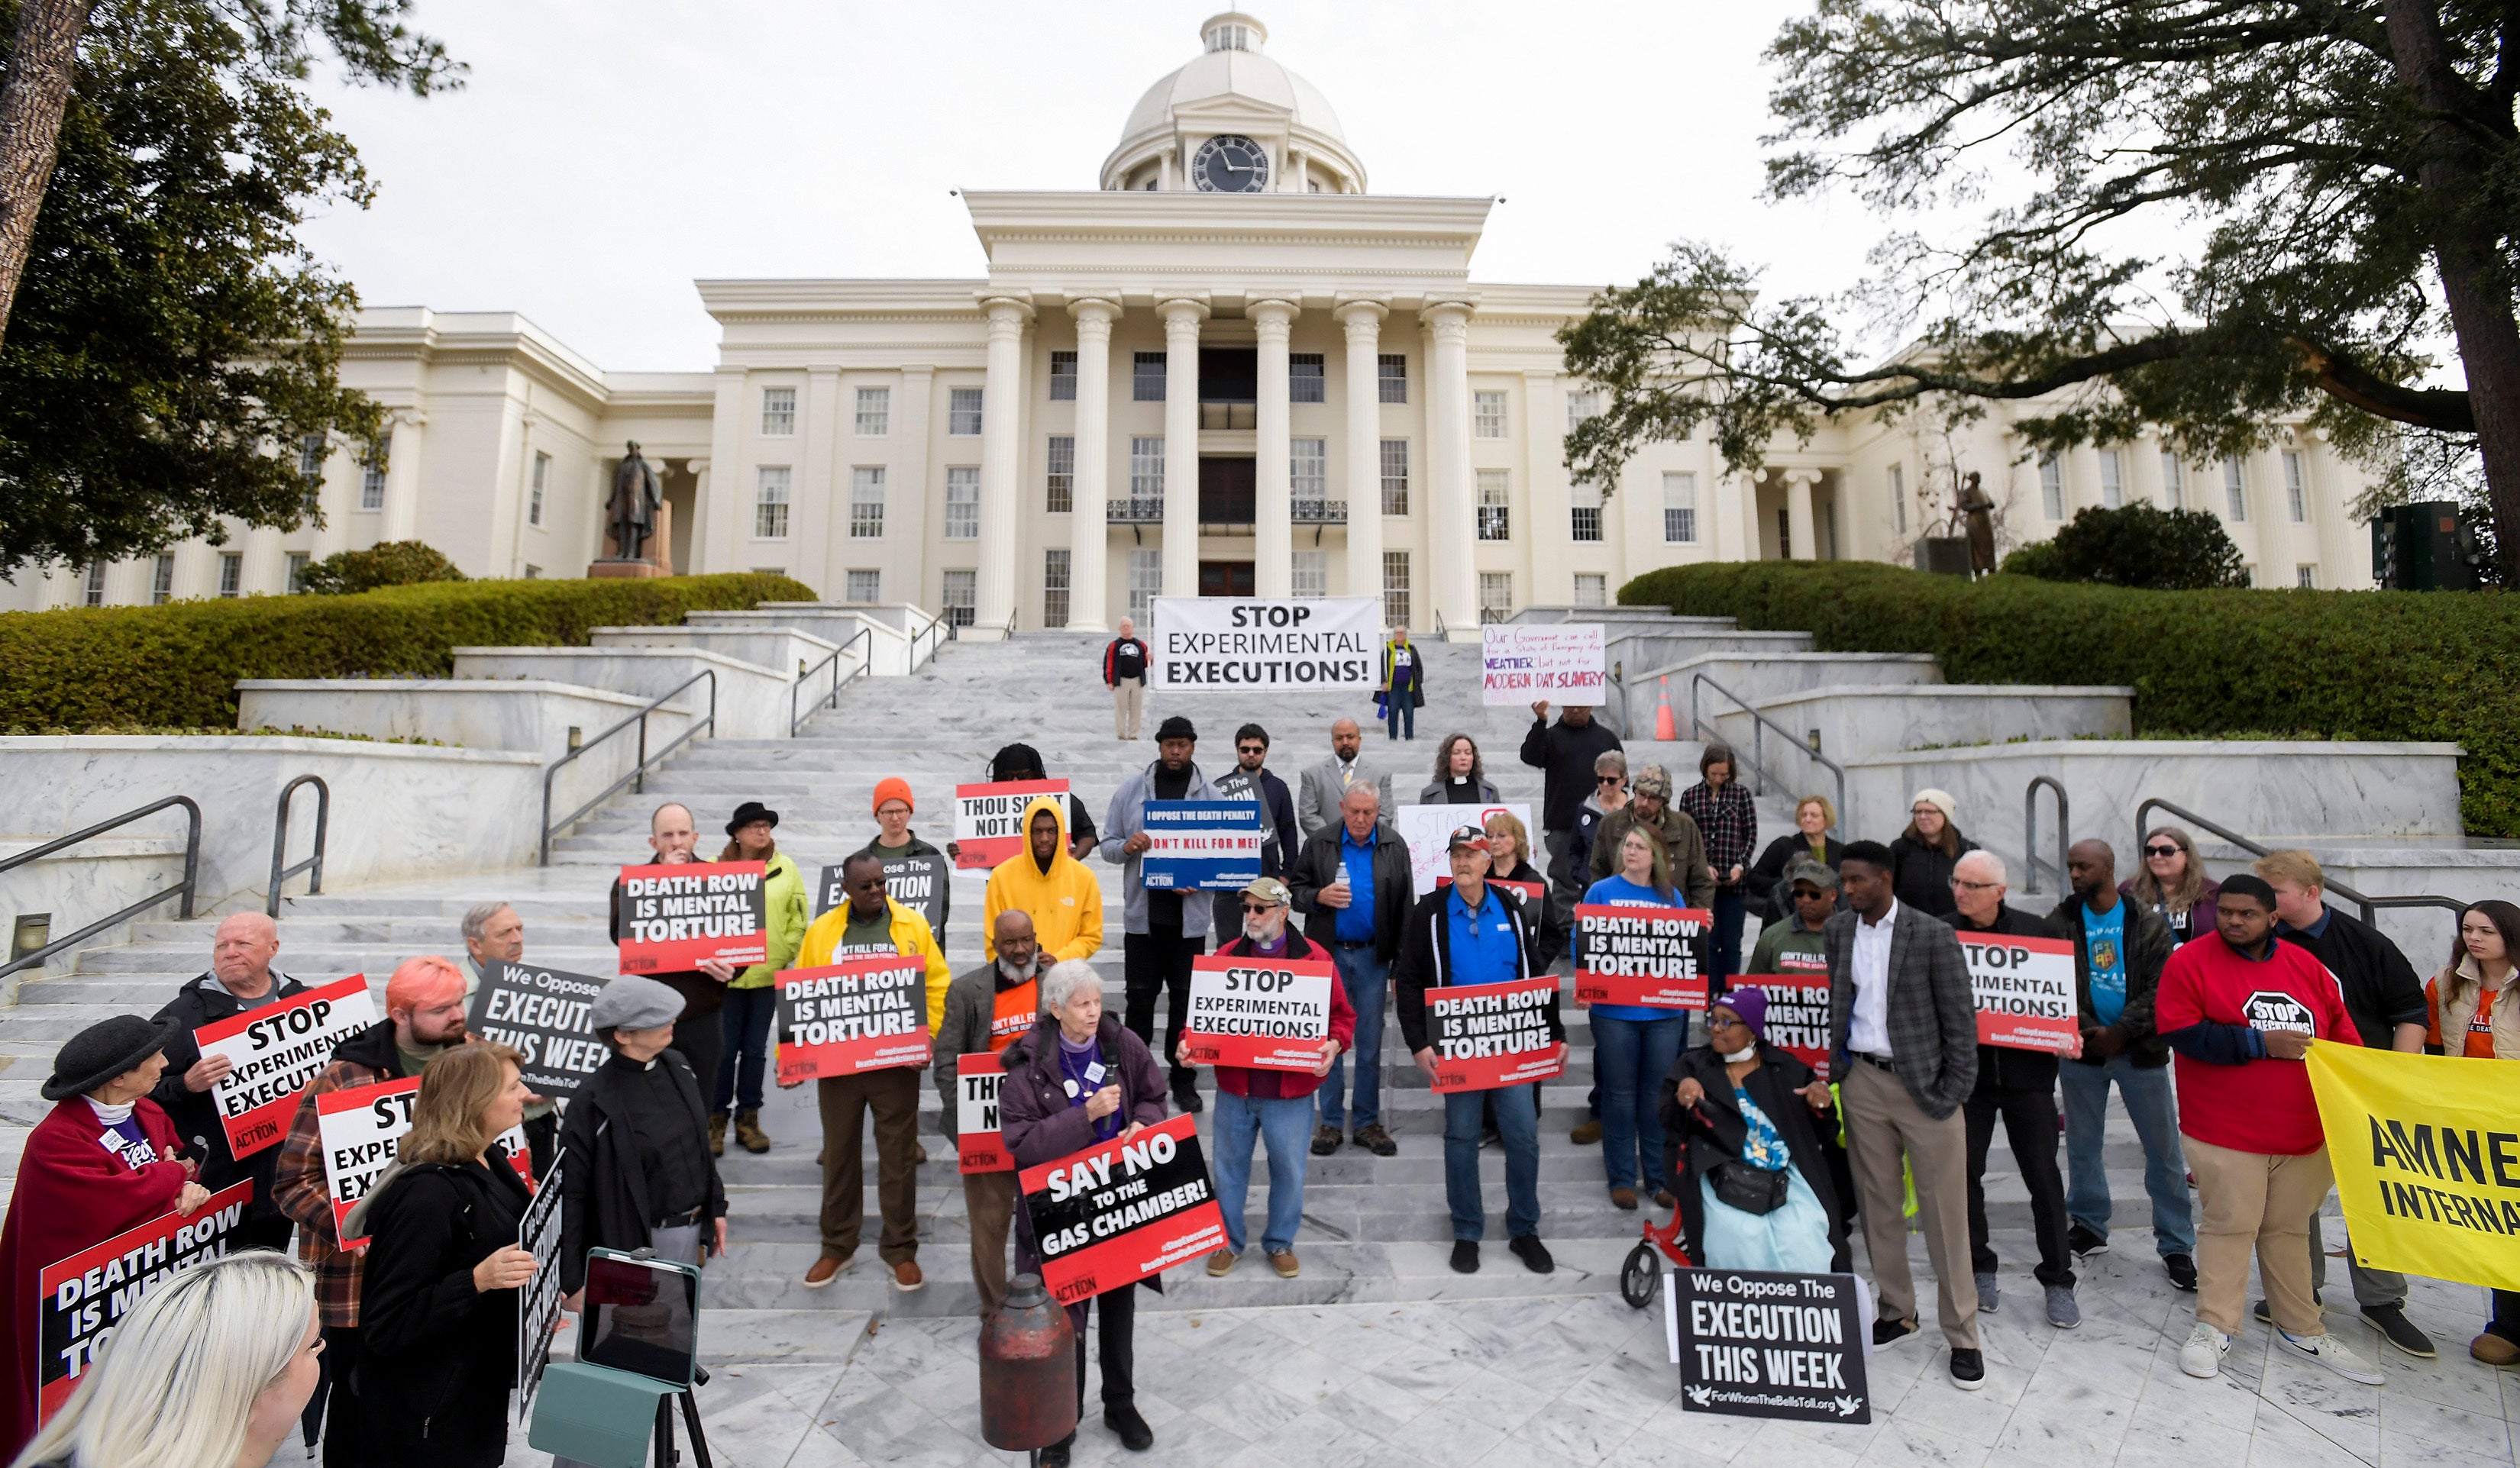 Nearly 100 protestors gather at the state capitol building in Montgomery, Alabama, on 23 January to call for Smith’s execution to be stayed